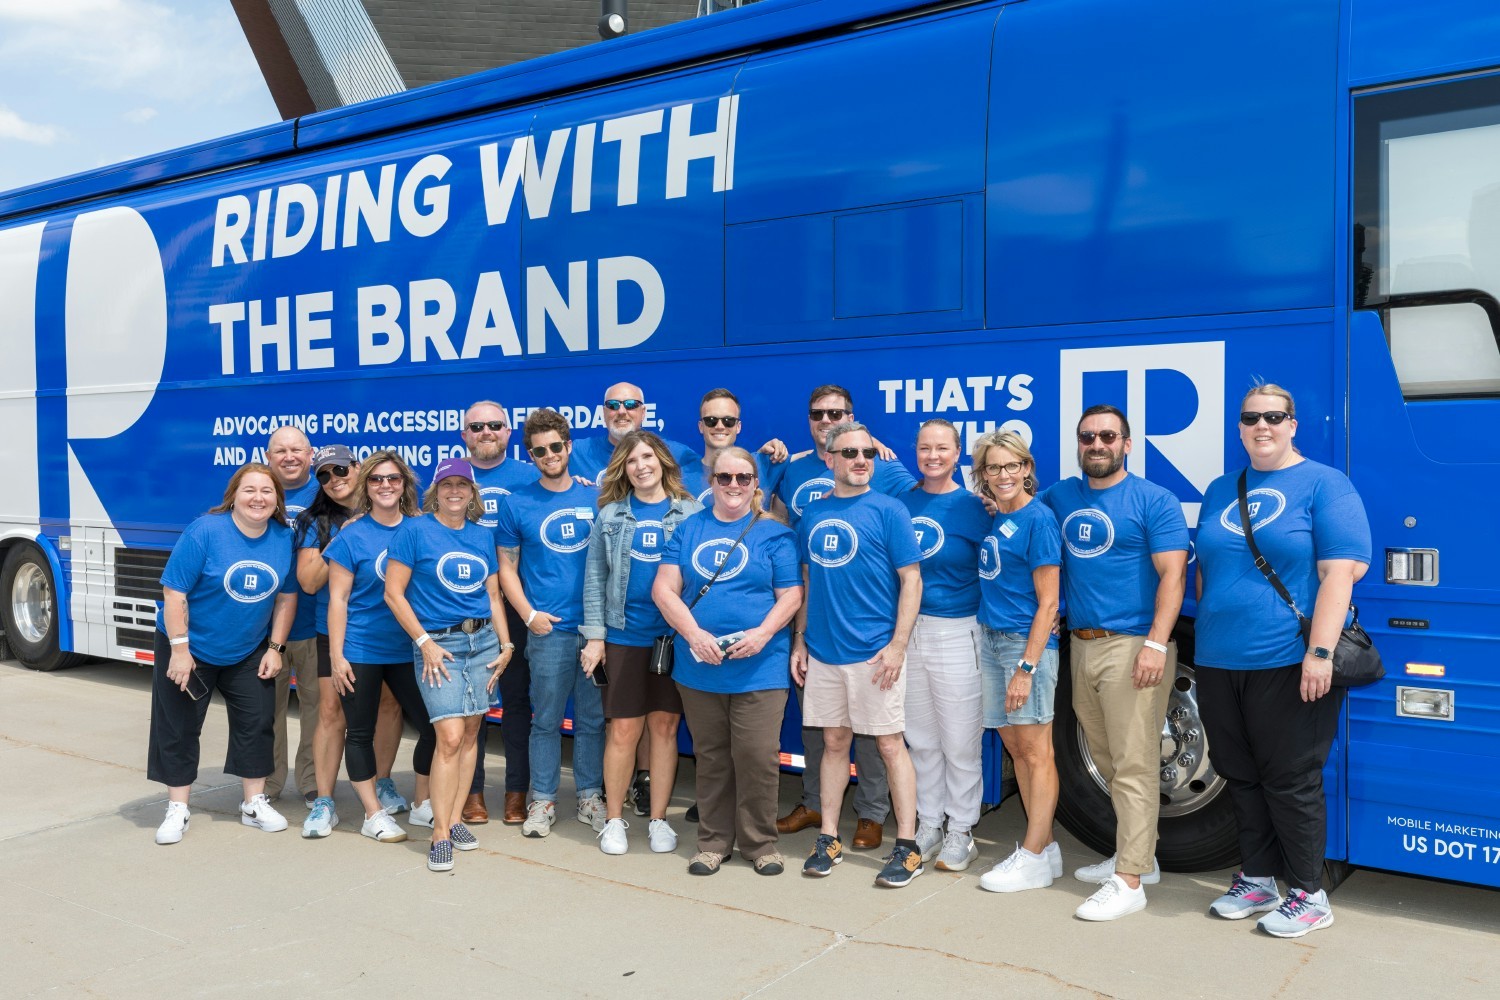 Staff at our 2023 Riding with the Brand event showcasing Realtors® and all they do for the community & housing industry.